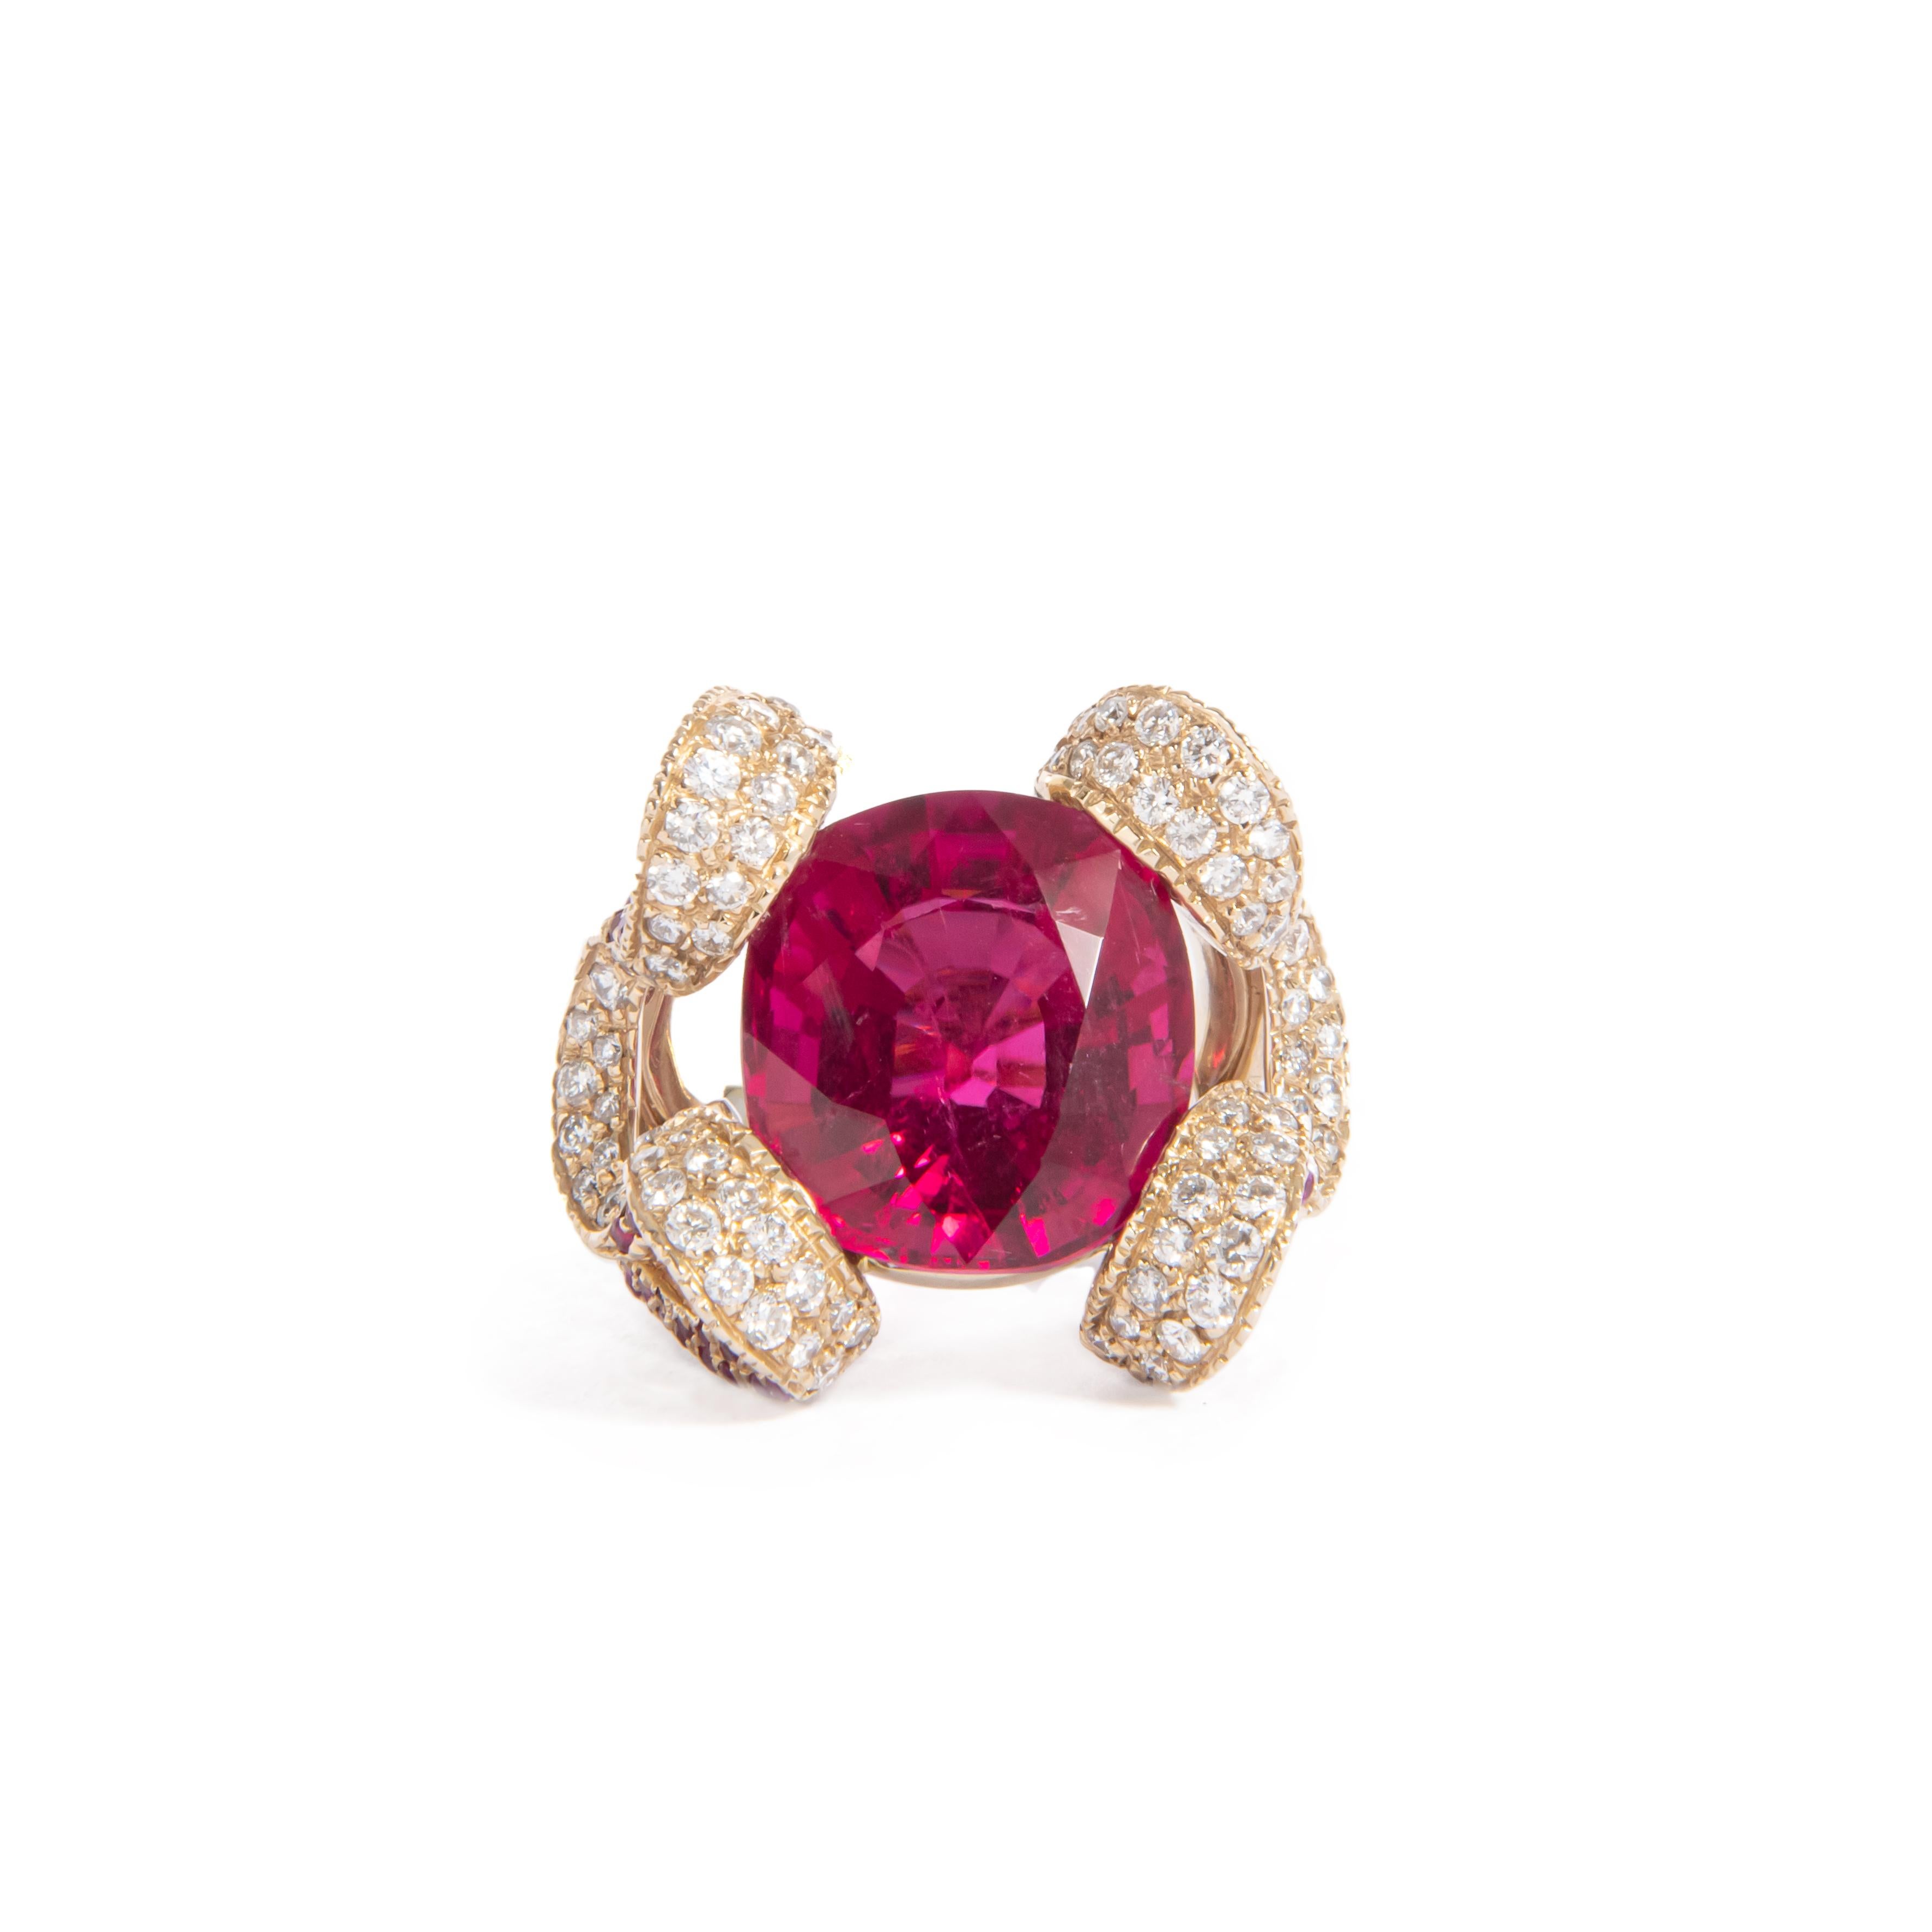 Ribbon Ring with Pink Sapphires and Rubelite by Regina Gambatesa at Second Petale Gallery.  

A ribbon of diamonds and pink sapphires accommodating an intense rubelite.

About the Gemstones : 
184 Diamonds : 2,16 ct
147 Pink Sapphires : 1,73 ct 
1